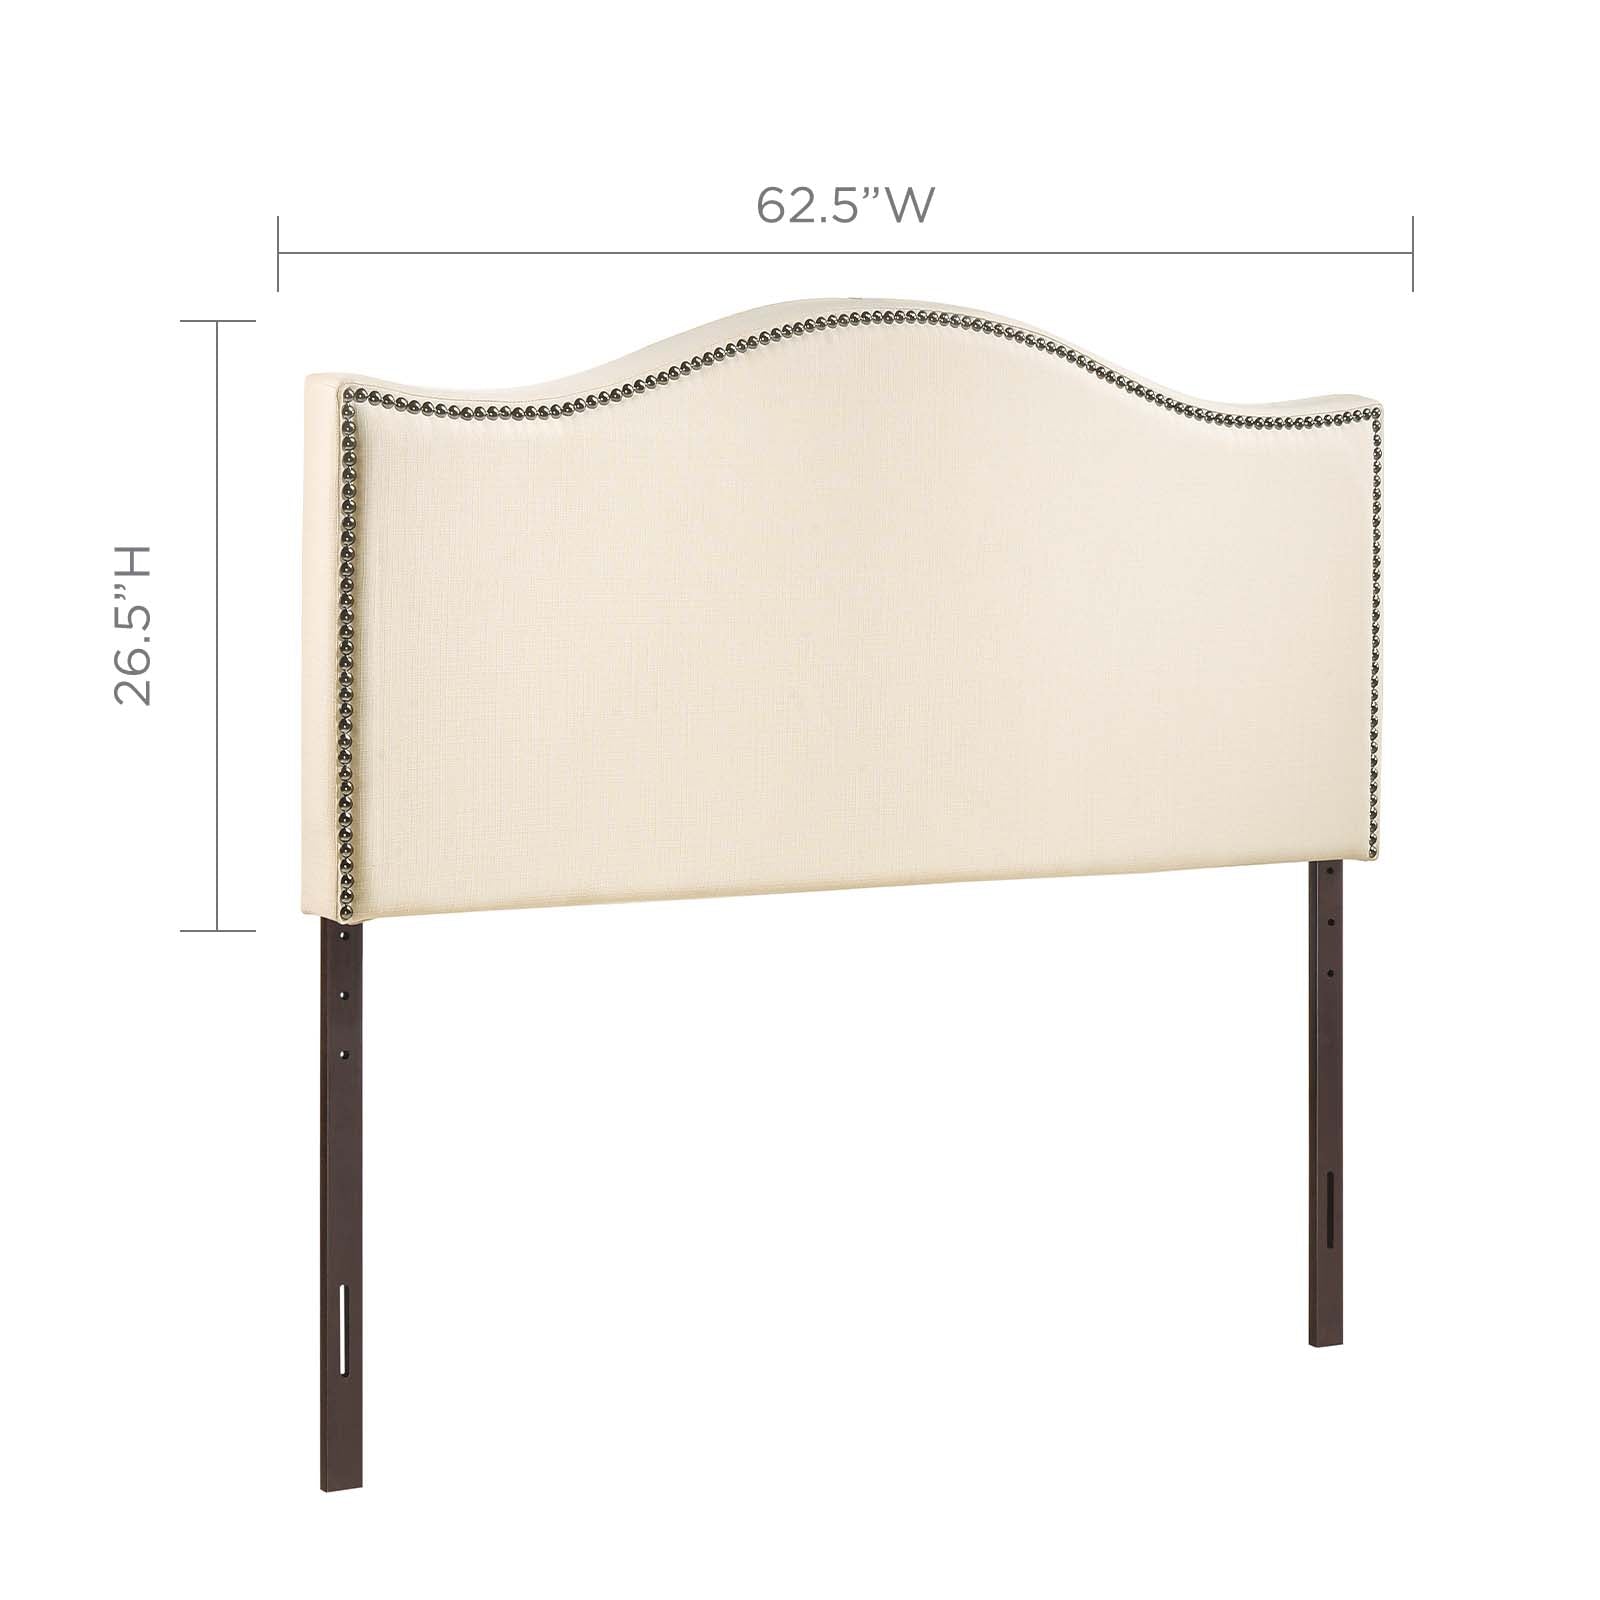 Modway Headboards - Curl Queen Nailhead Upholstered Headboard Ivory